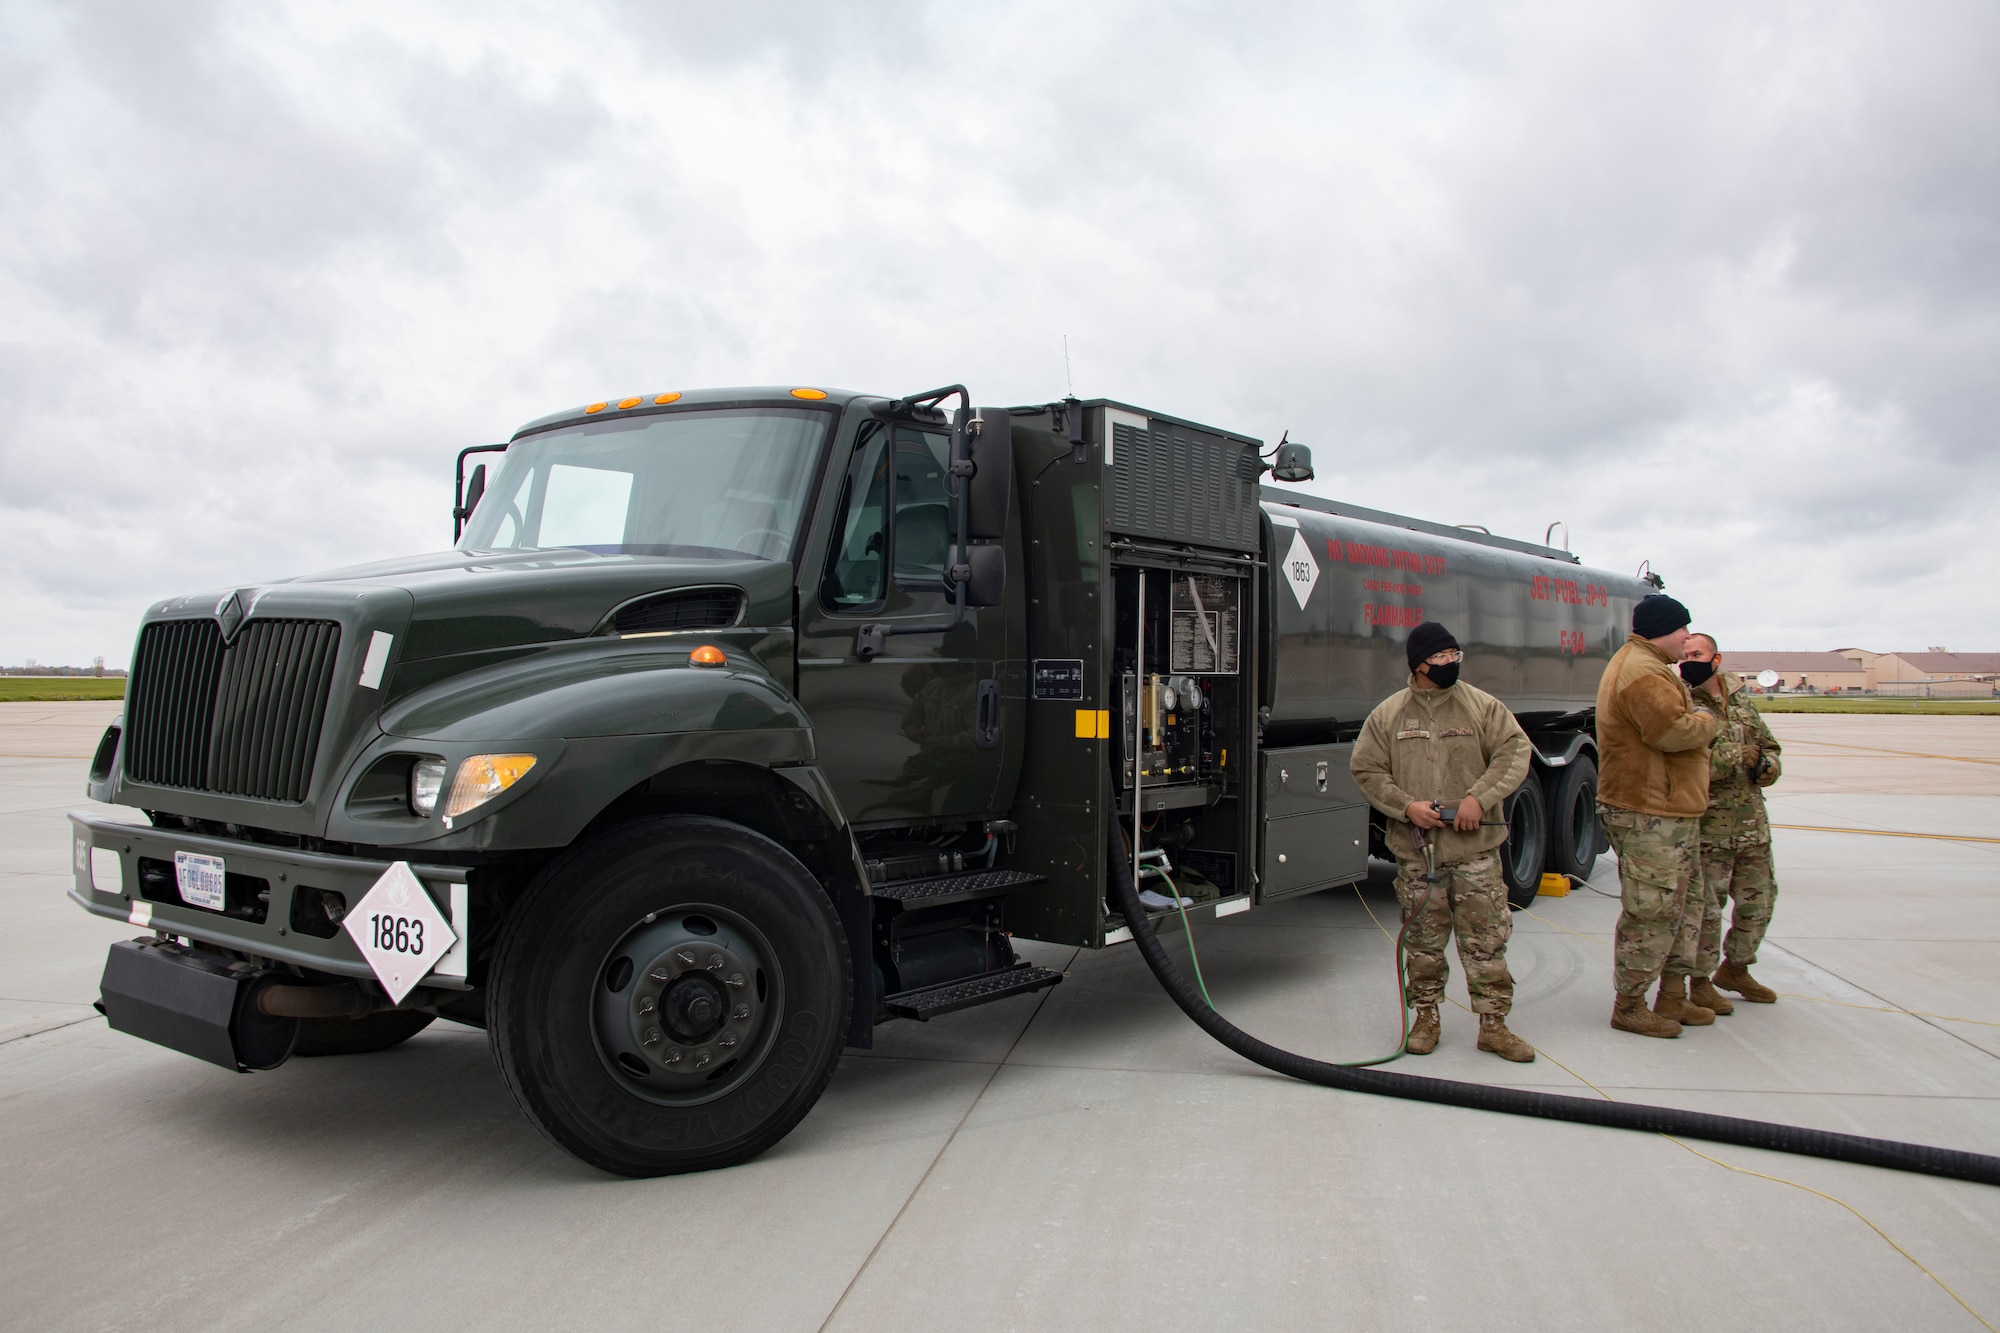 Three Airmen stand next to a refueling truck